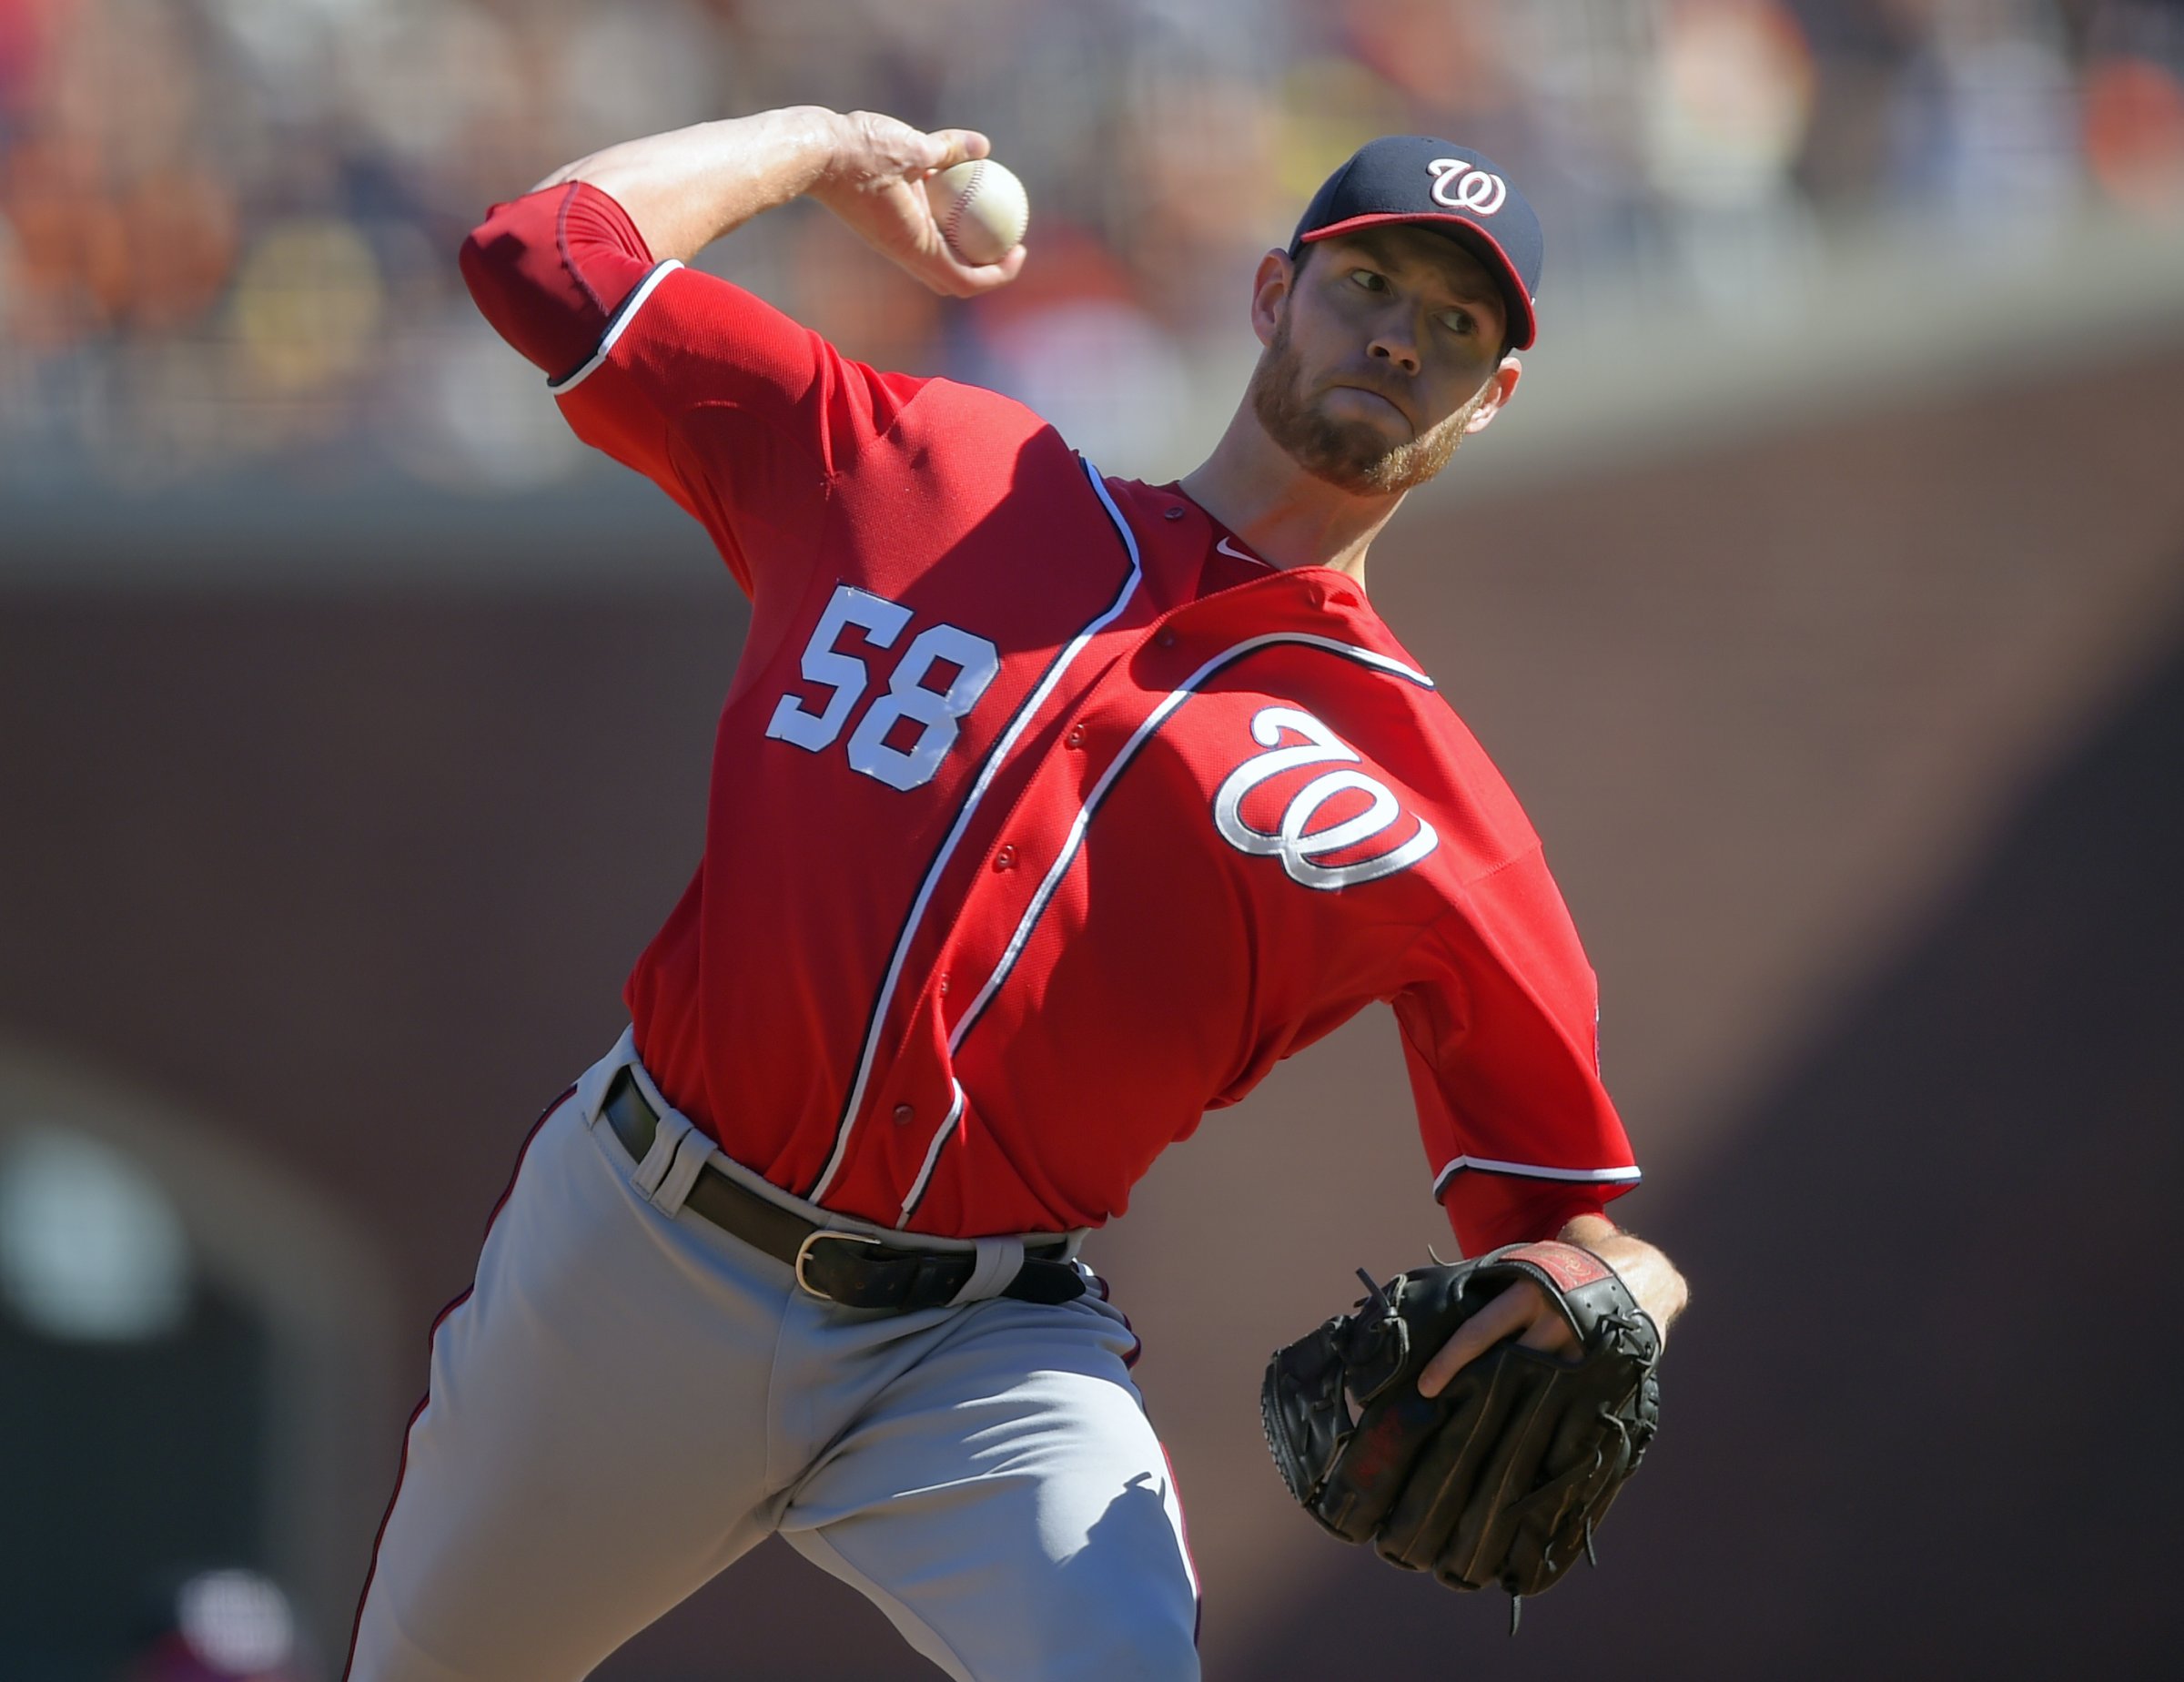 the Washington Nationals Nationals play the San Francisco Giants in the 3rd playoff game